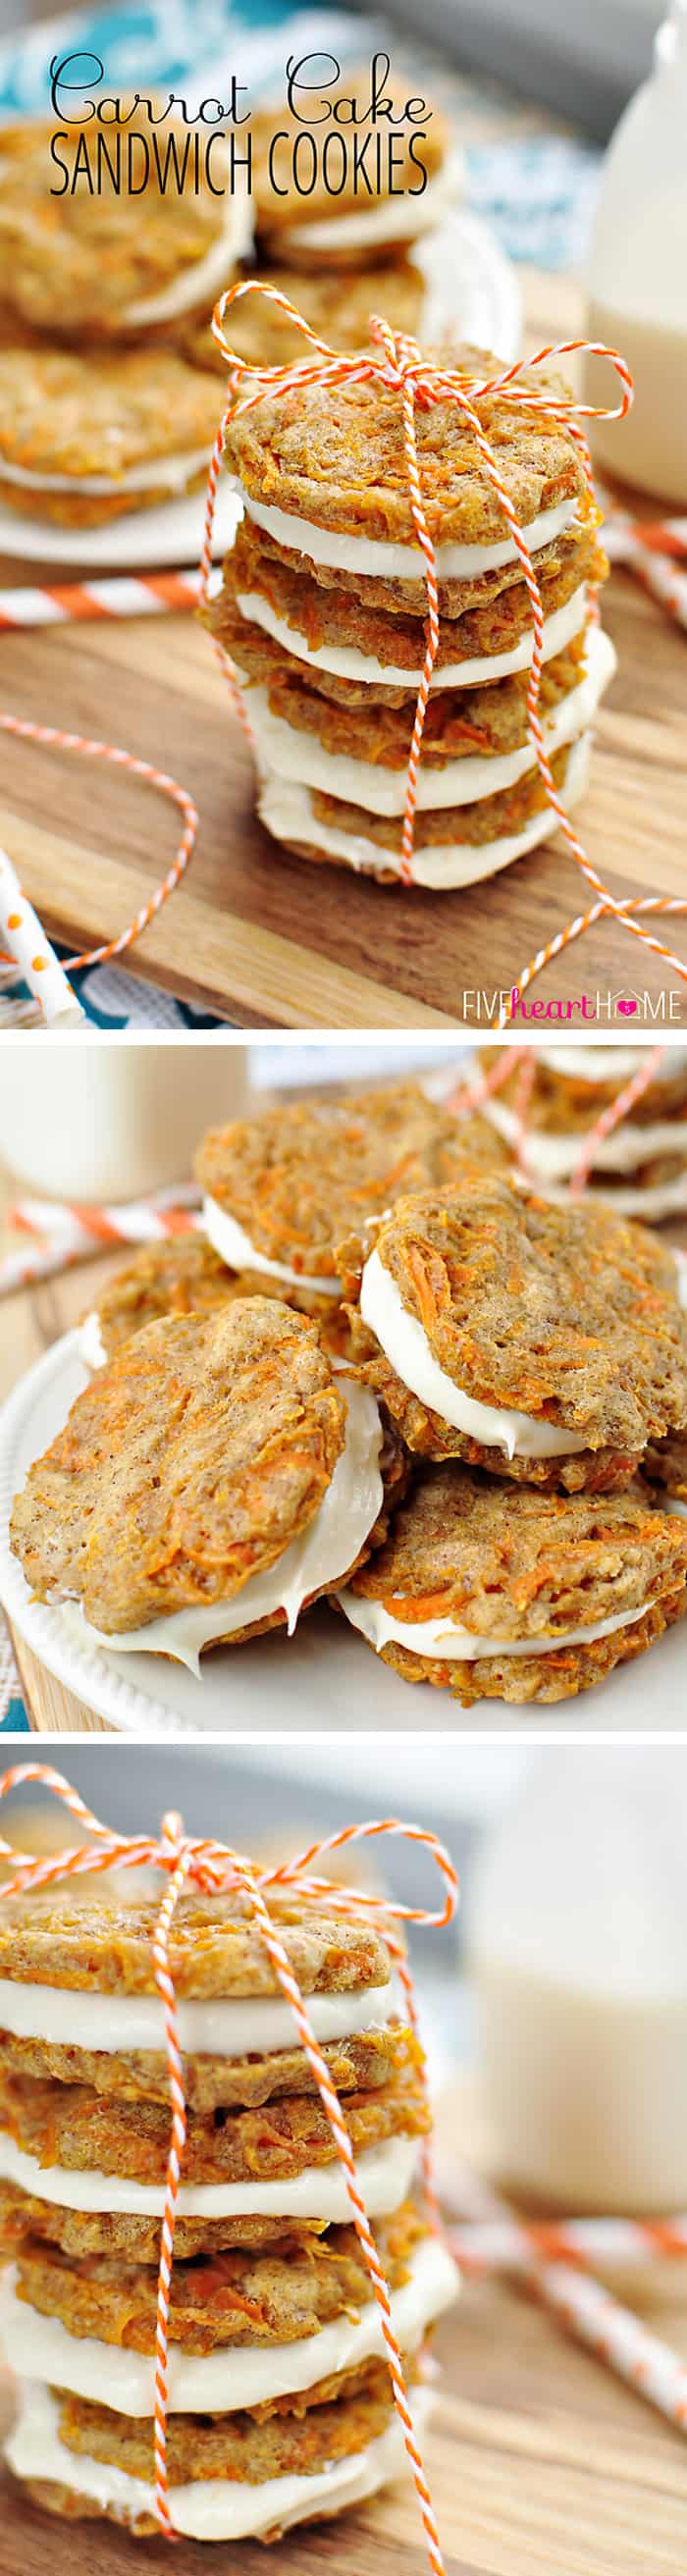 Carrot Cake Cookies ~ mini carrot cake whoopie pies, or sandwich cookies, are filled with cream cheese frosting make an easy, hand-held spring or Easter dessert! | FiveHeartHome.com via @fivehearthome